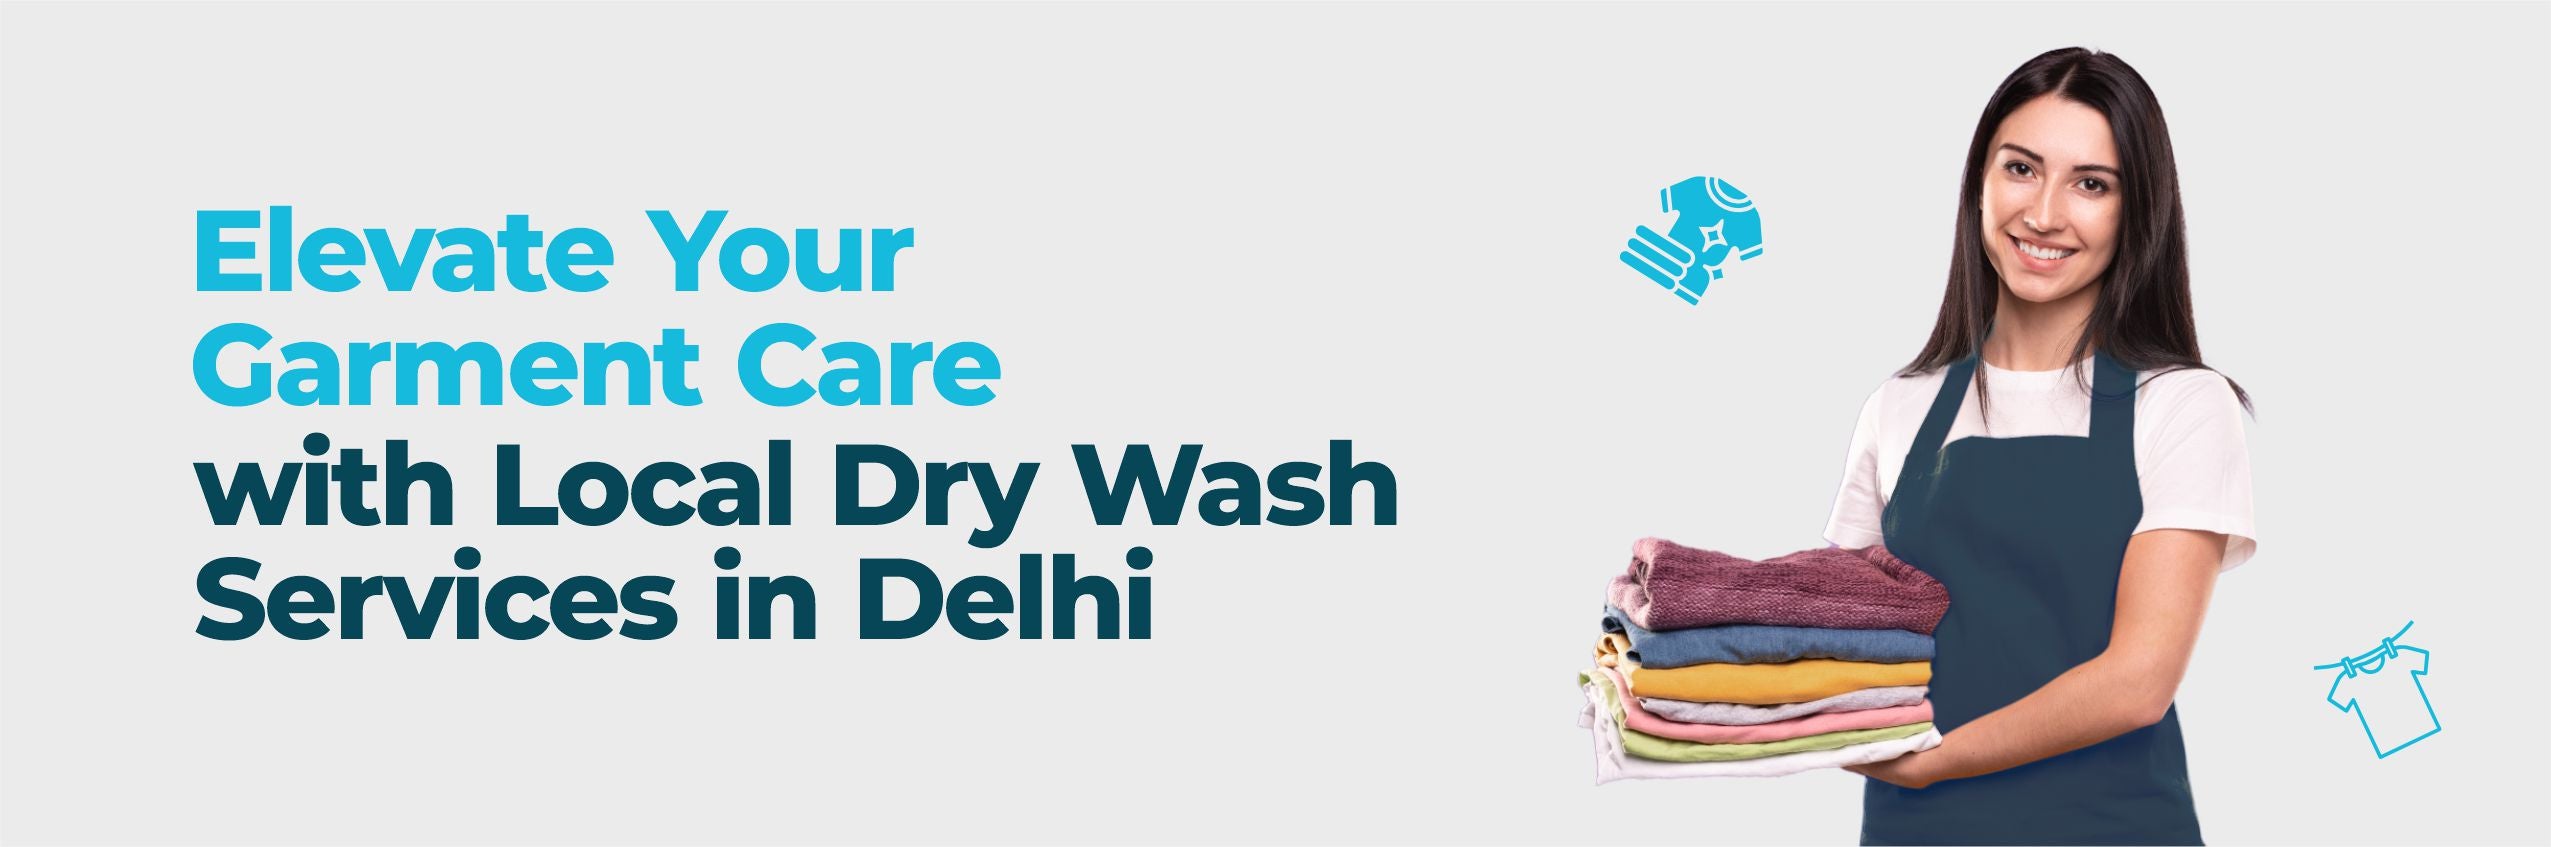 Elevate Your Garment Care with Local Dry Wash Services in Delhi